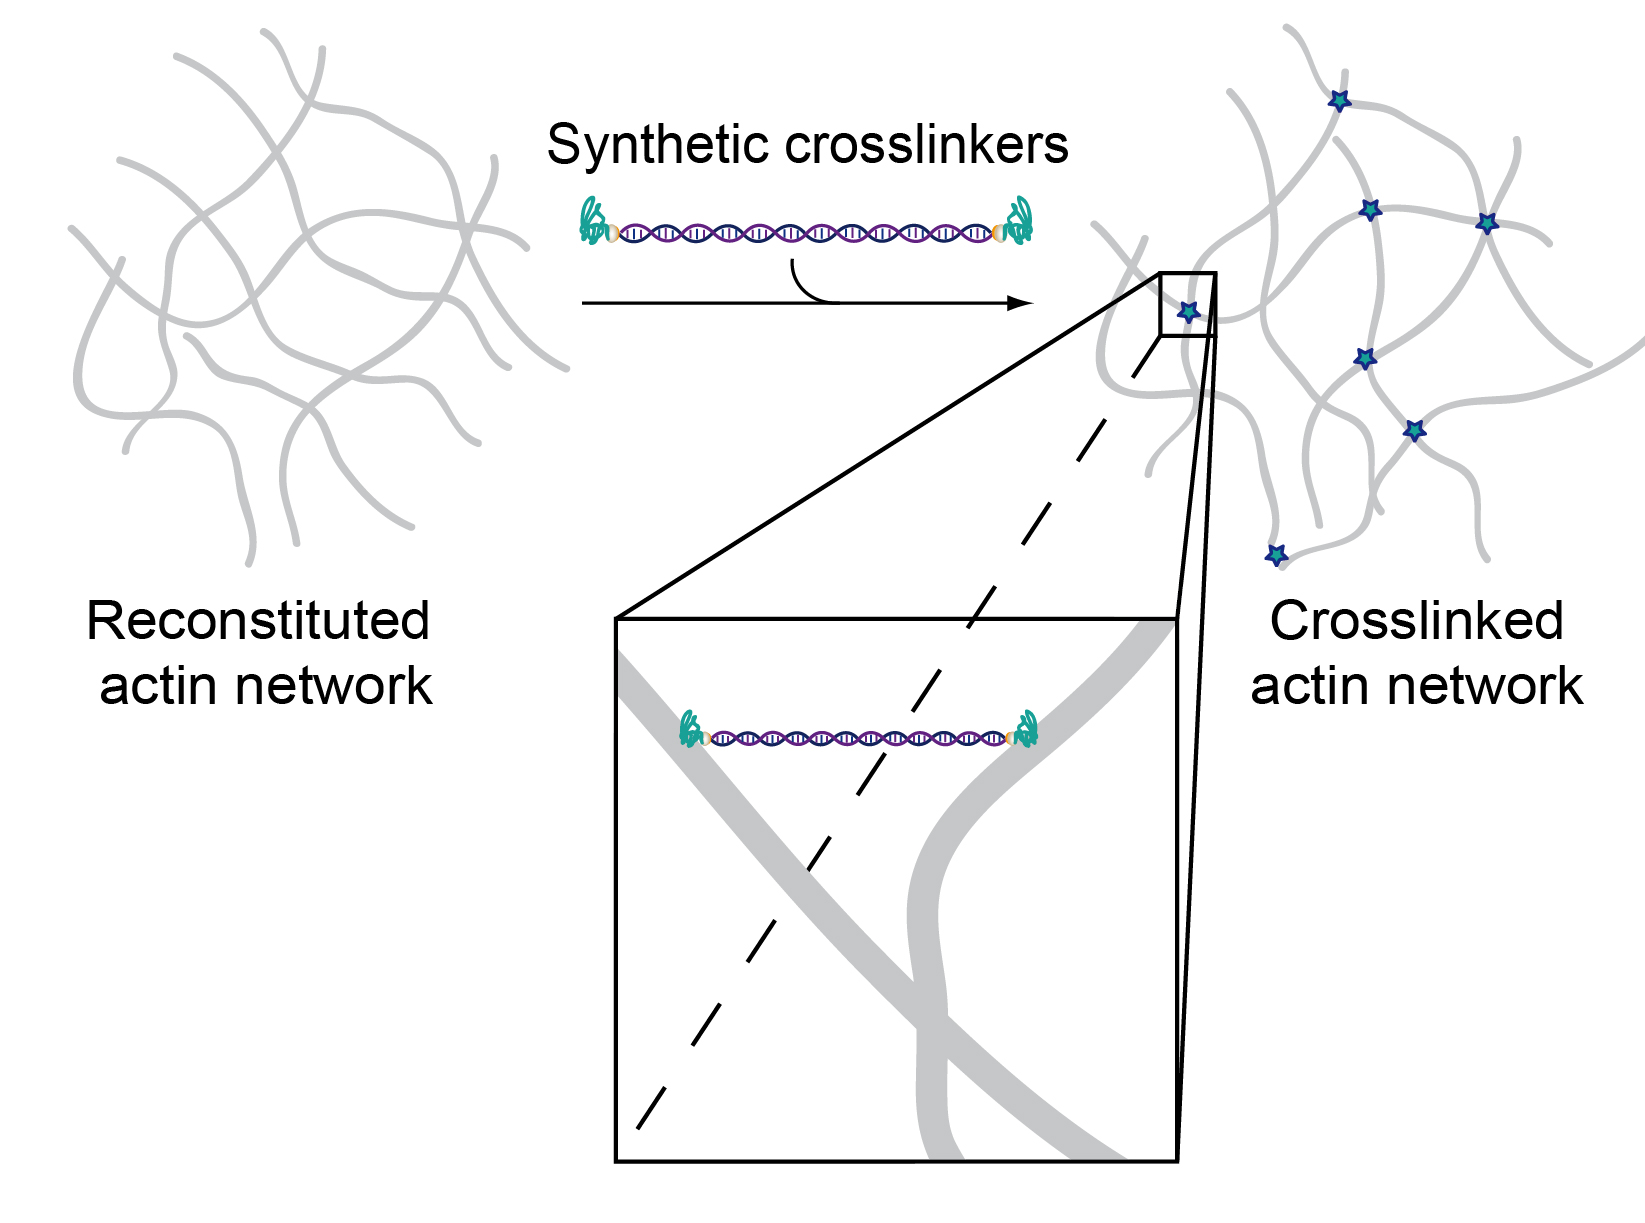 Since the two binding domains were connected by double-stranded DNA, the construct can physically crosslink actin filaments within the system.